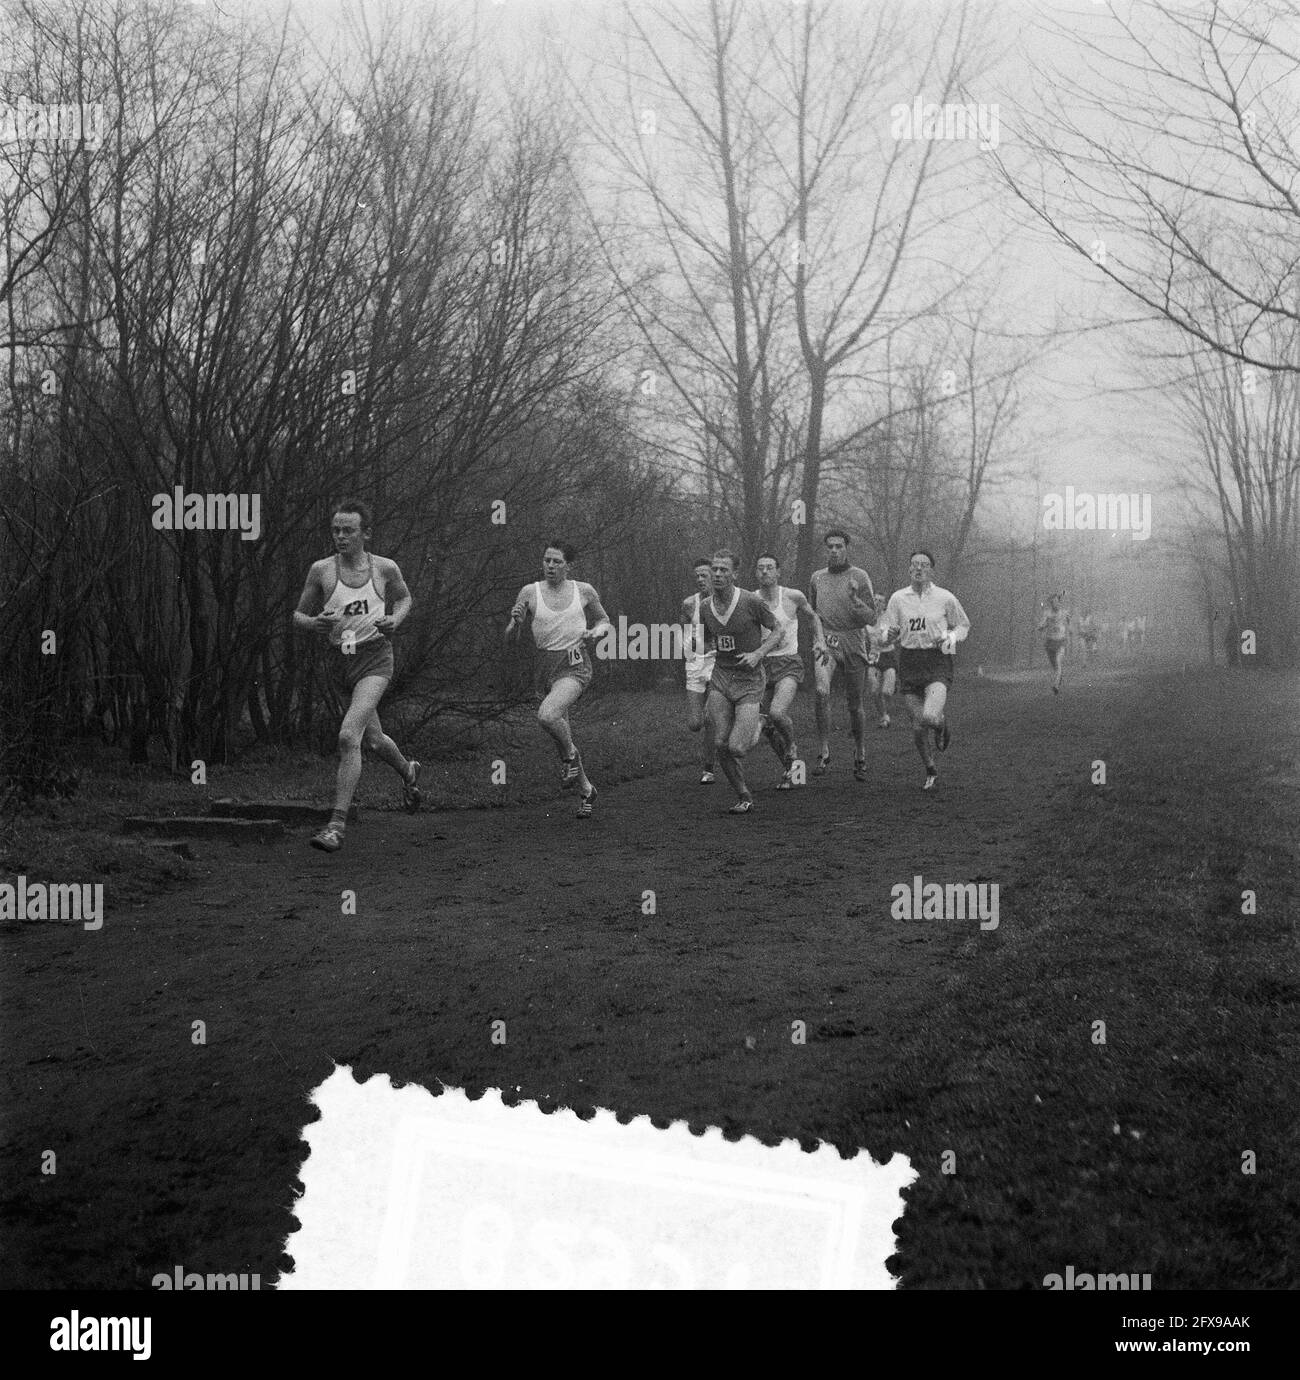 Bosloop Leiden. Runners on the road, February 3, 1957, The Netherlands, 20th century press agency photo, news to remember, documentary, historic photography 1945-1990, visual stories, human history of the Twentieth Century, capturing moments in time Stock Photo